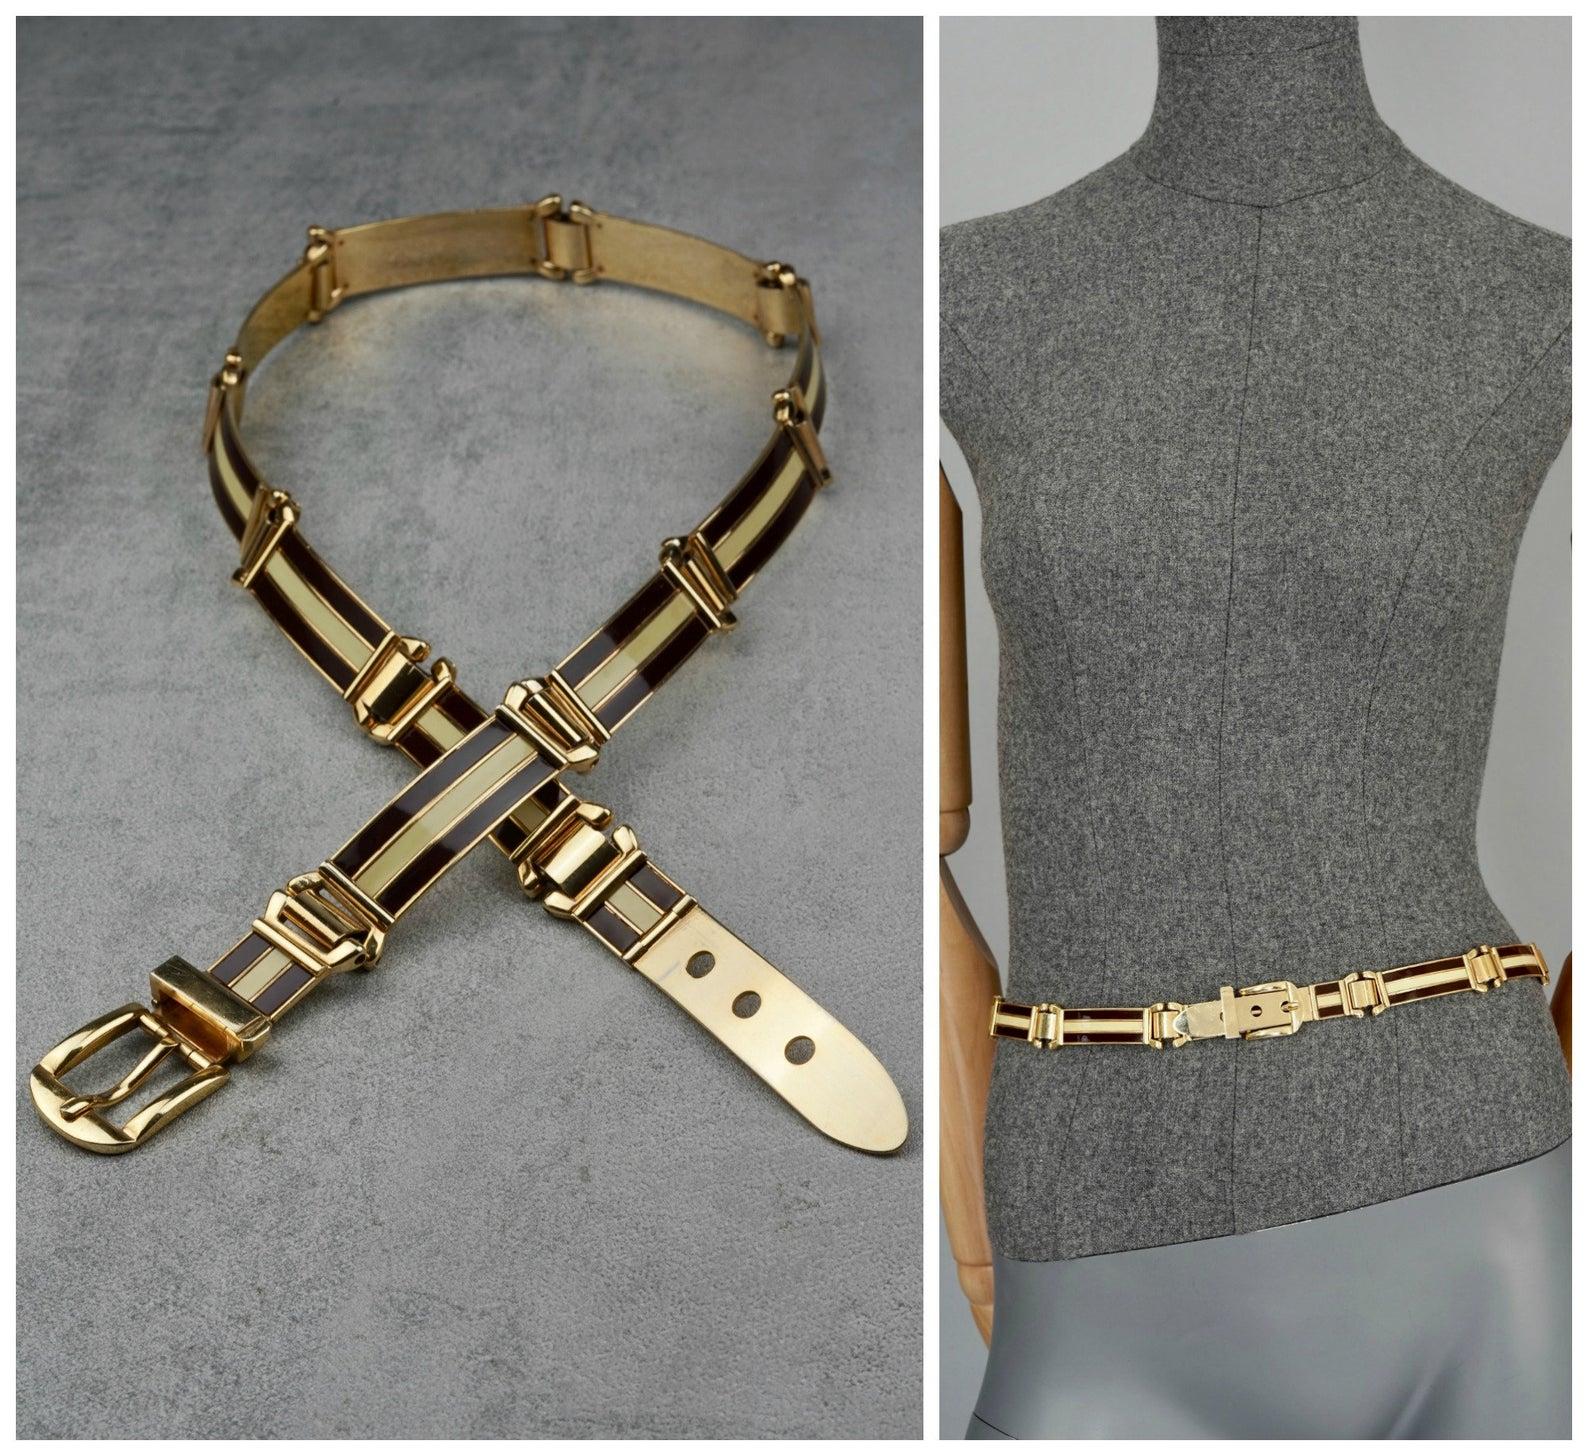 Vintage Iconic GUCCI Gold Enamel Buckle Belt

Measurements:
Height: 0.86 inch (2.2 cm)
Wearable Length: 28.15 inches, 28.74 inches, 29.33 inches (71.5 cm, 73 cm, 74.5 cm)

Features:
- 100% Authentic GUCCI.
- Iconic GUCCI enamel buckle belt in